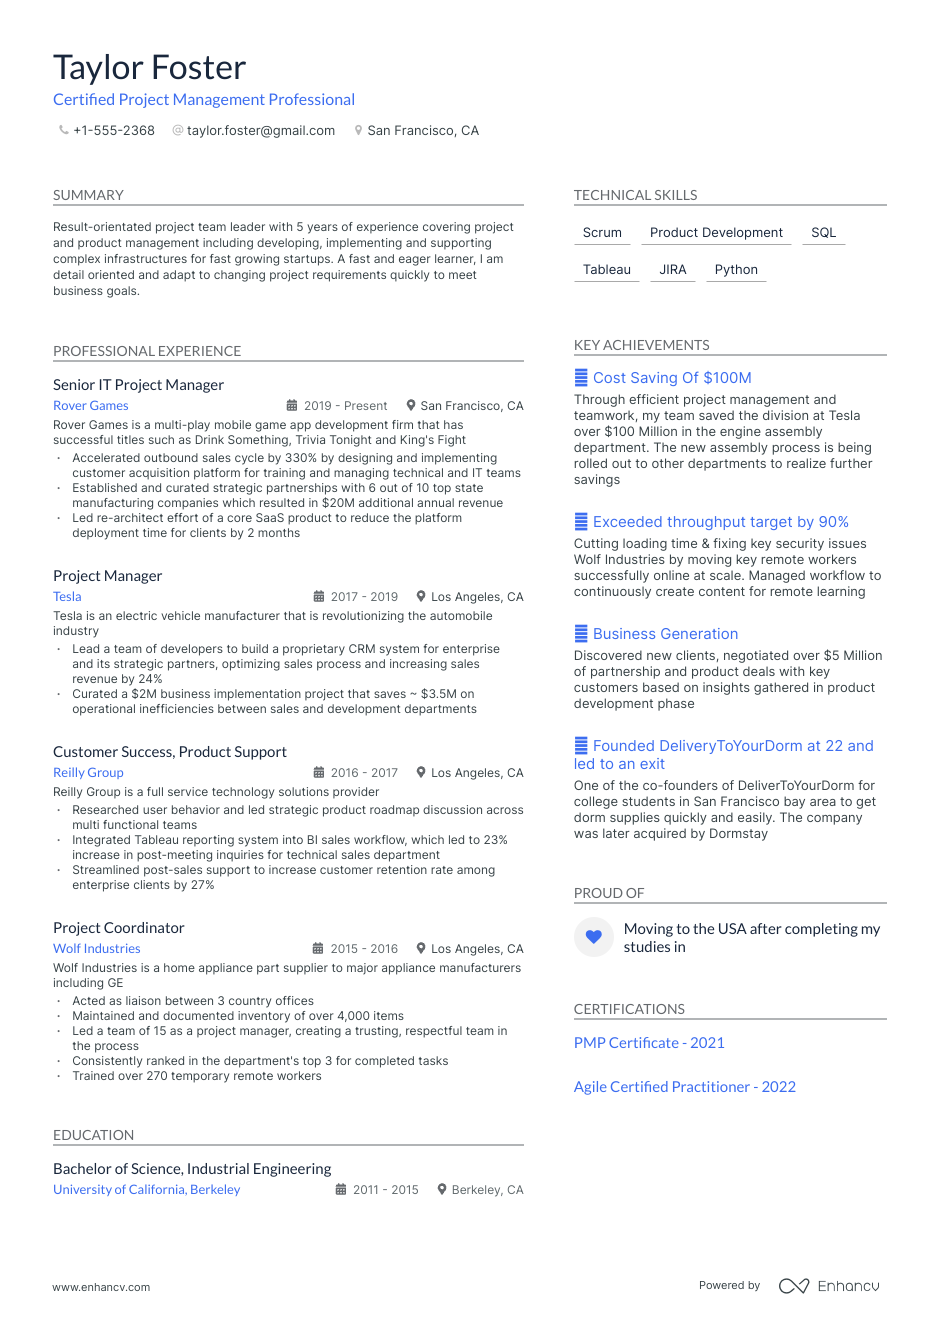 Project Manager resume example